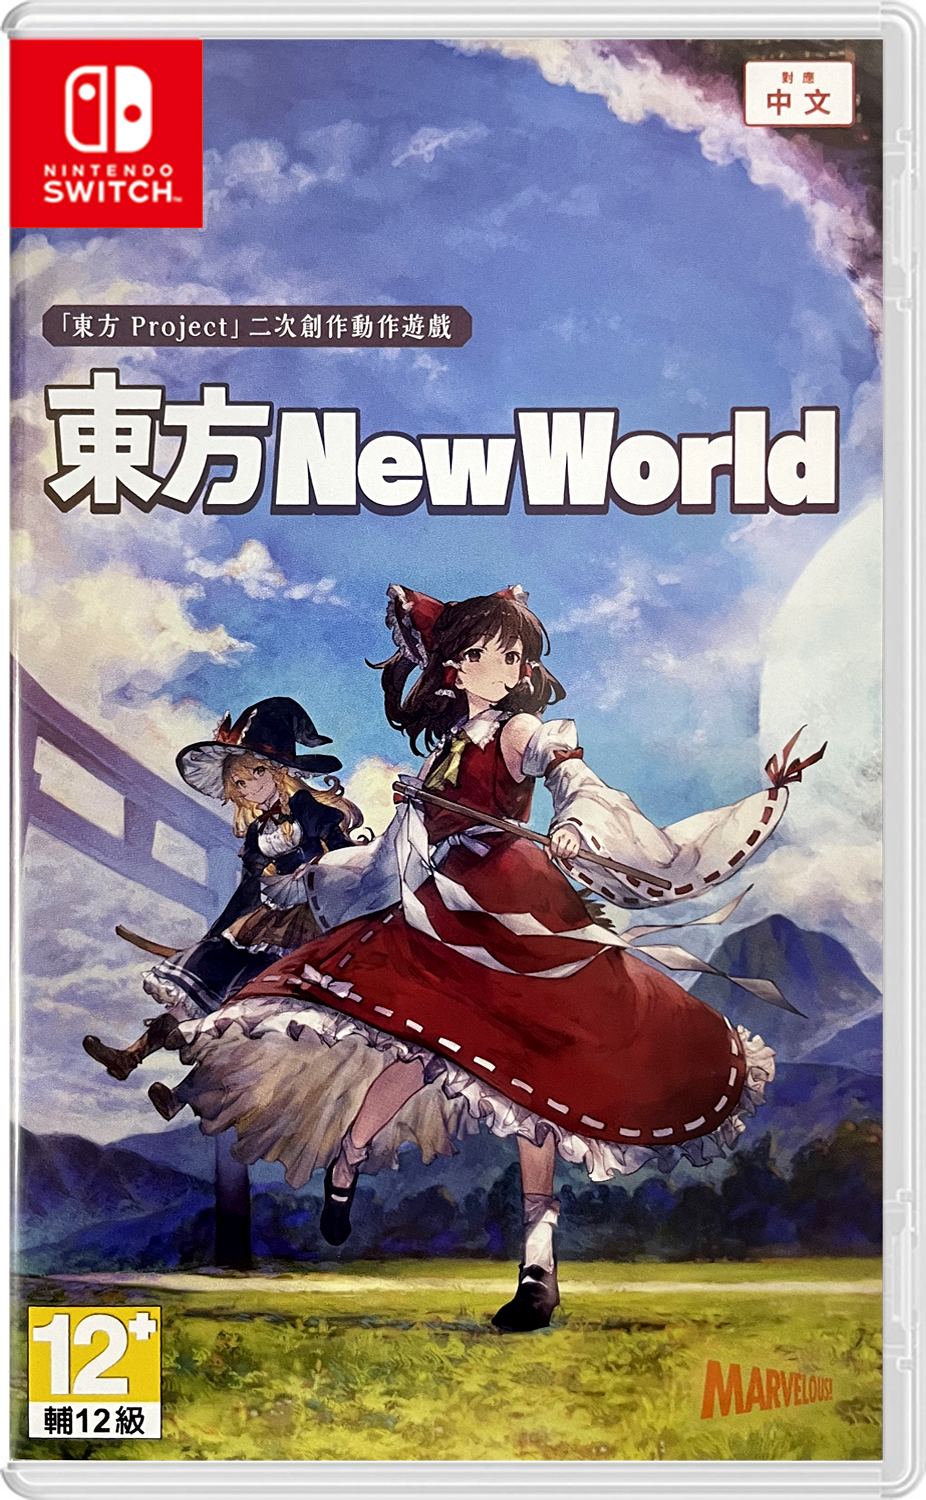 Touhou: New World (Chinese) for Nintendo Switch